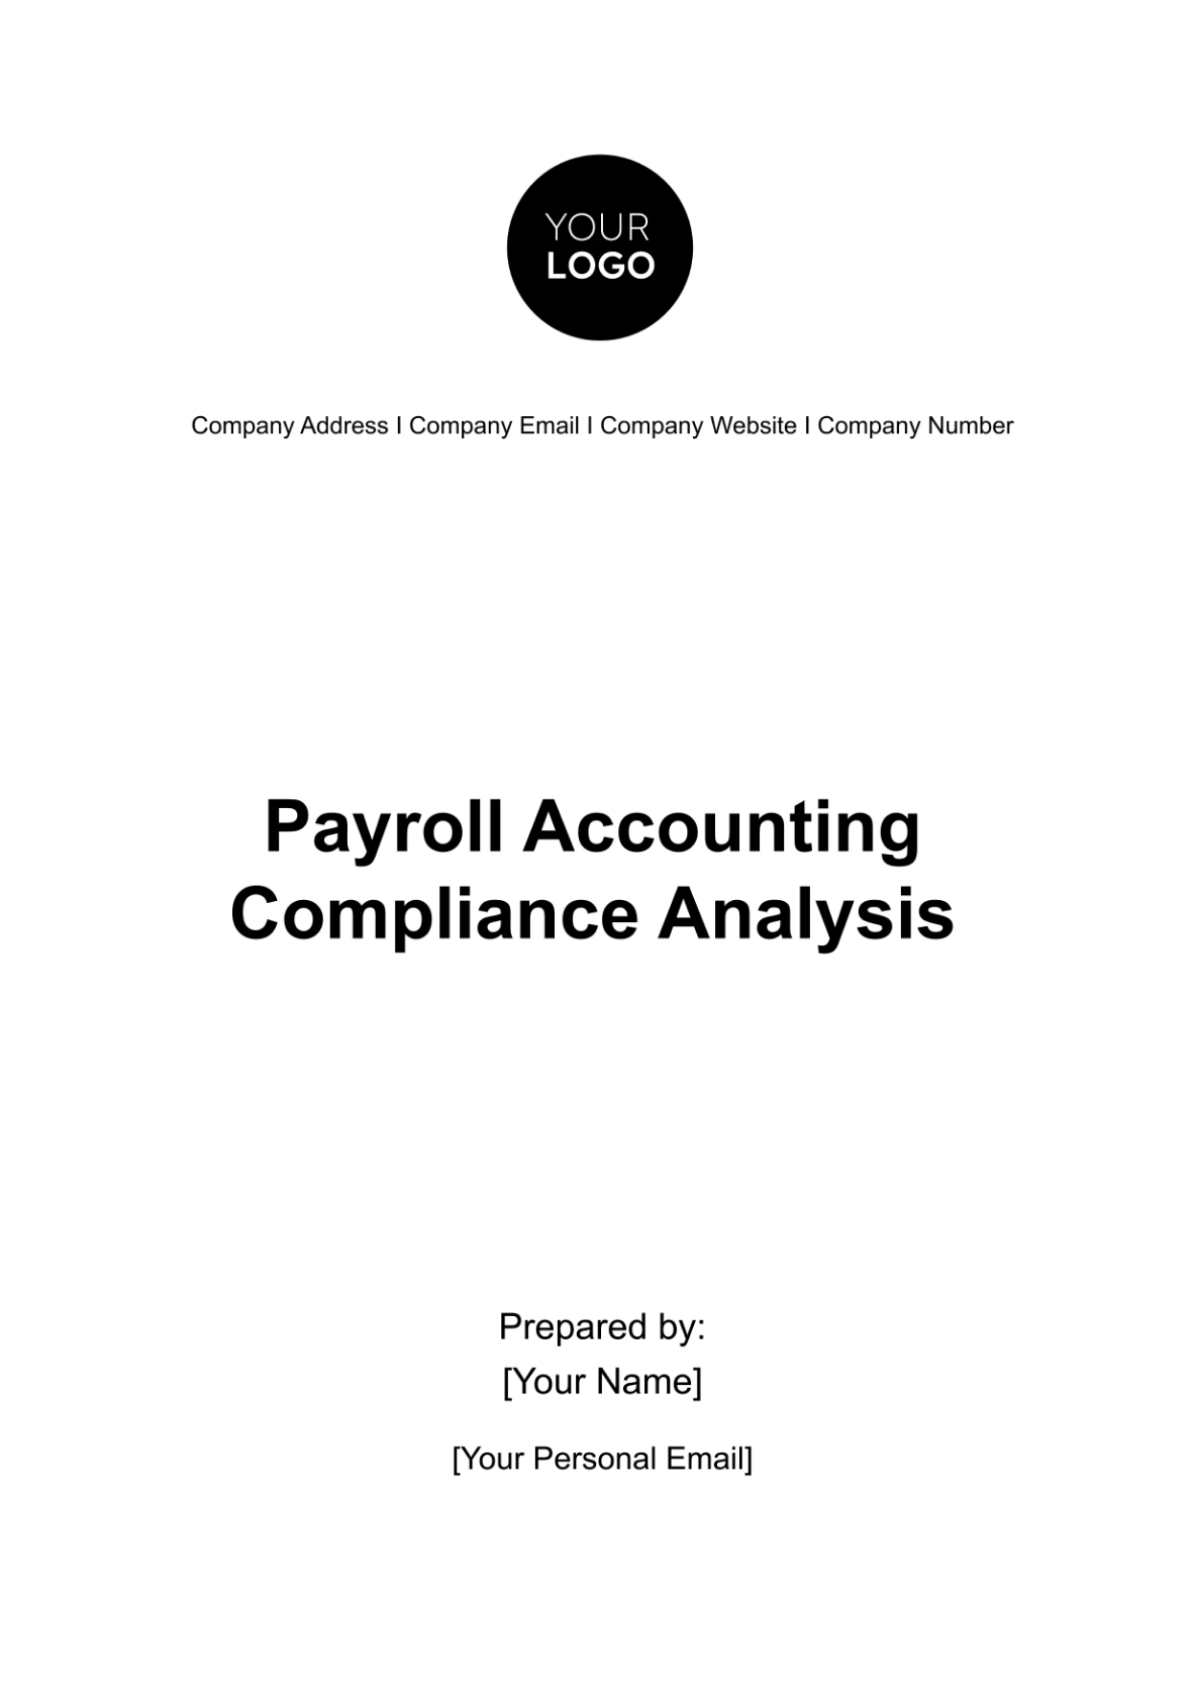 Payroll Accounting Compliance Analysis Template